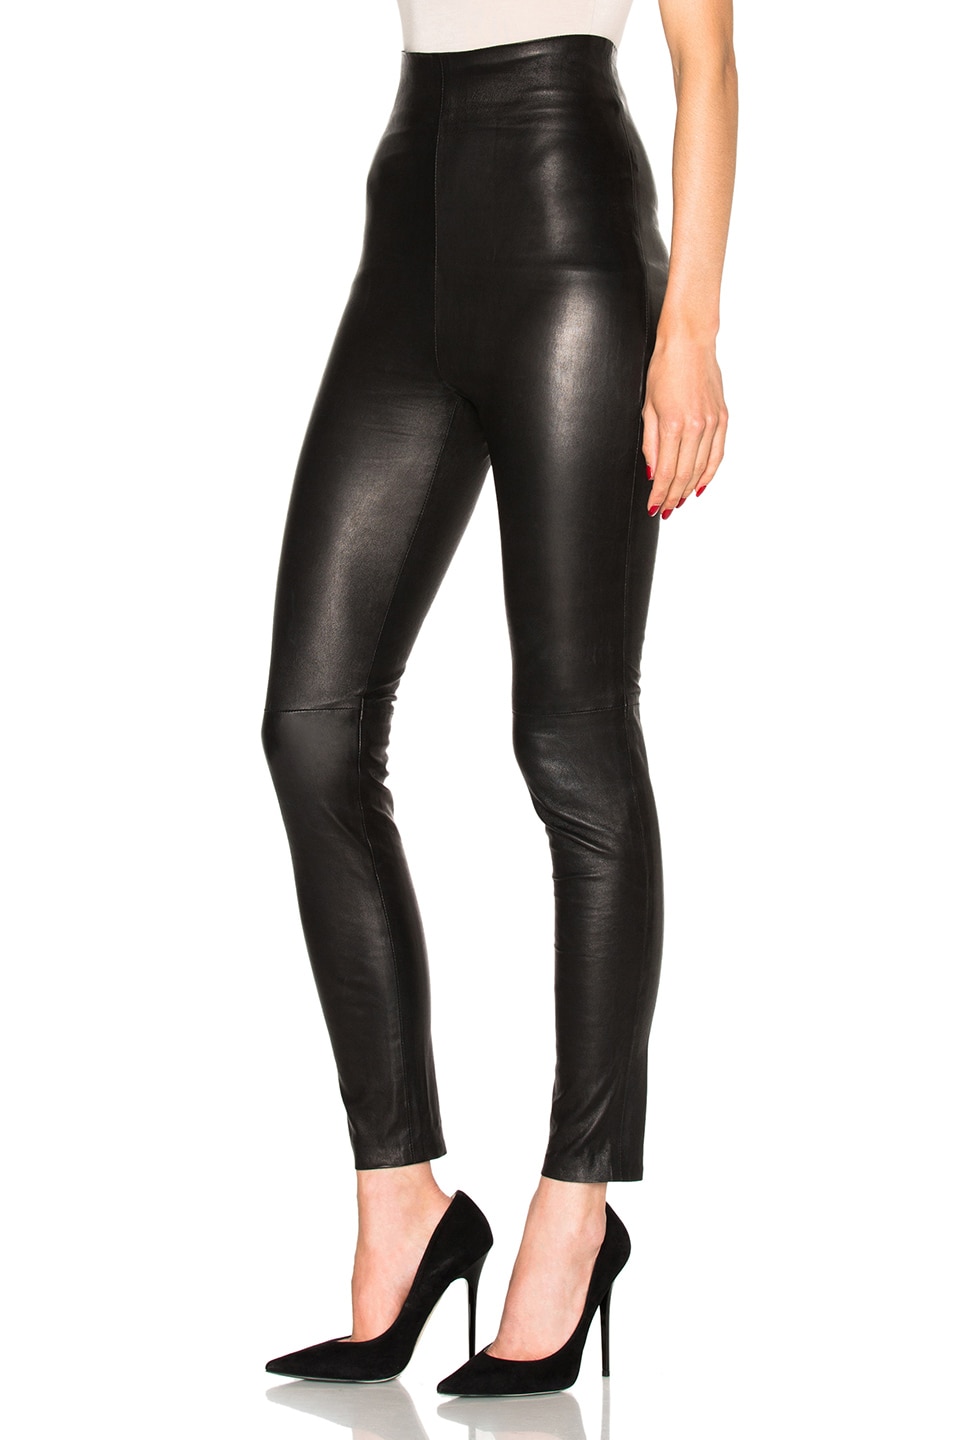 ThePerfext Jessica High Waisted Leather Leggings in Black | FWRD